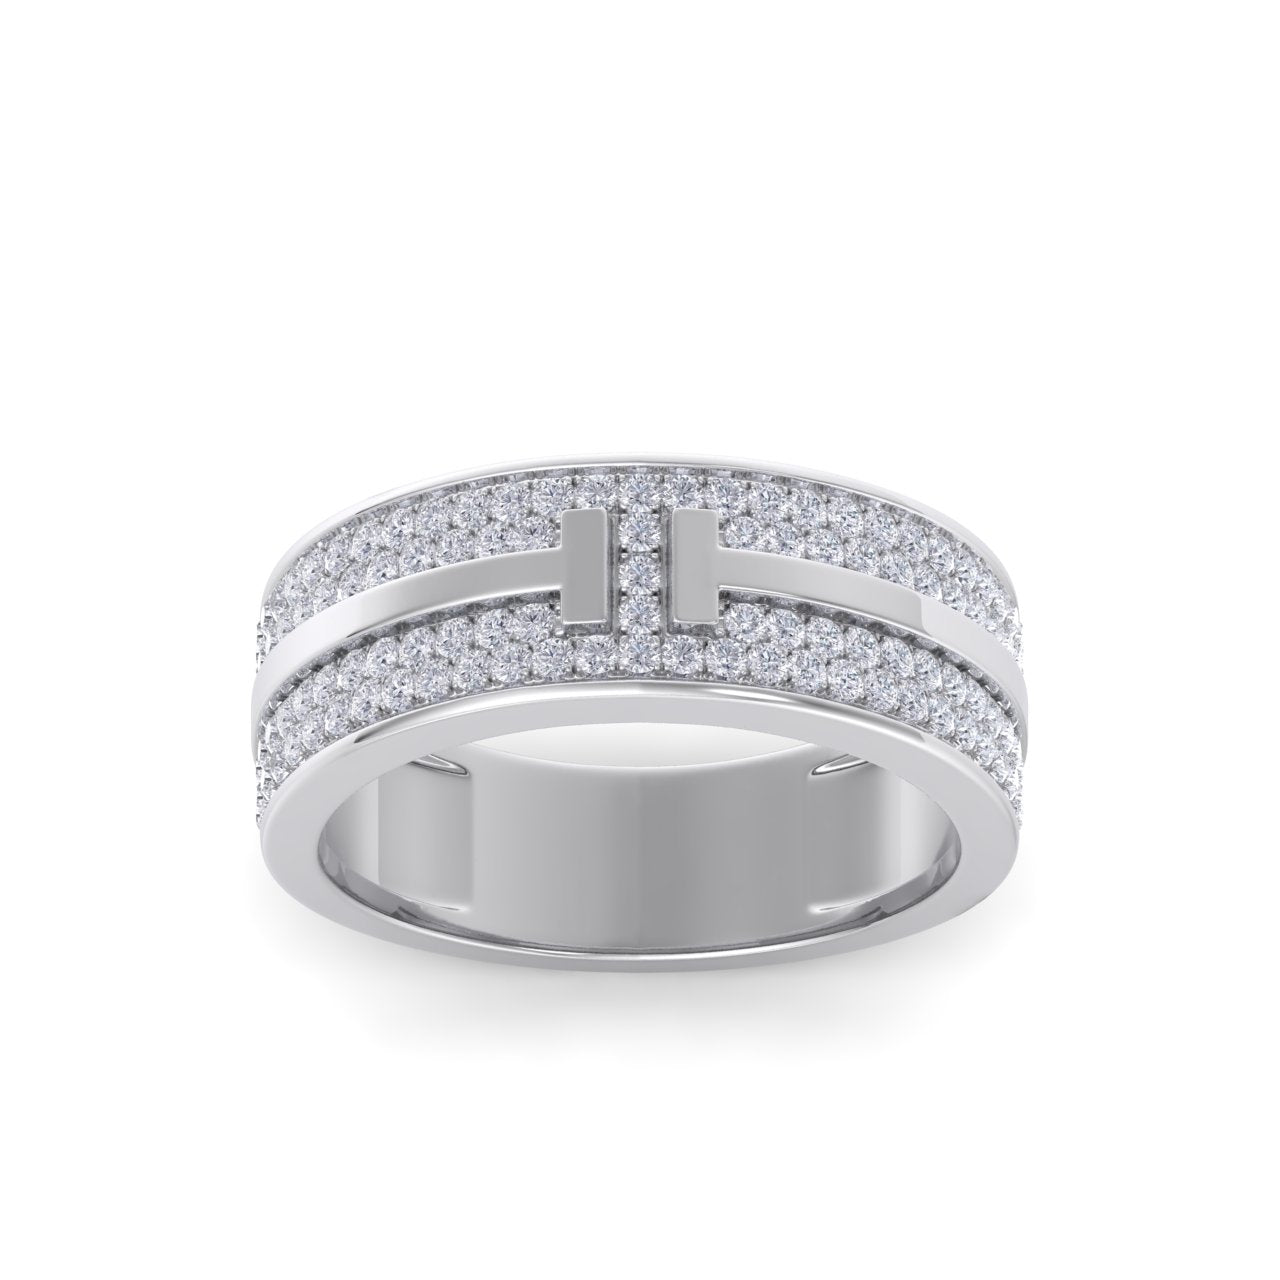 Diamond ring in white gold with white diamonds of 0.55 ct in weight